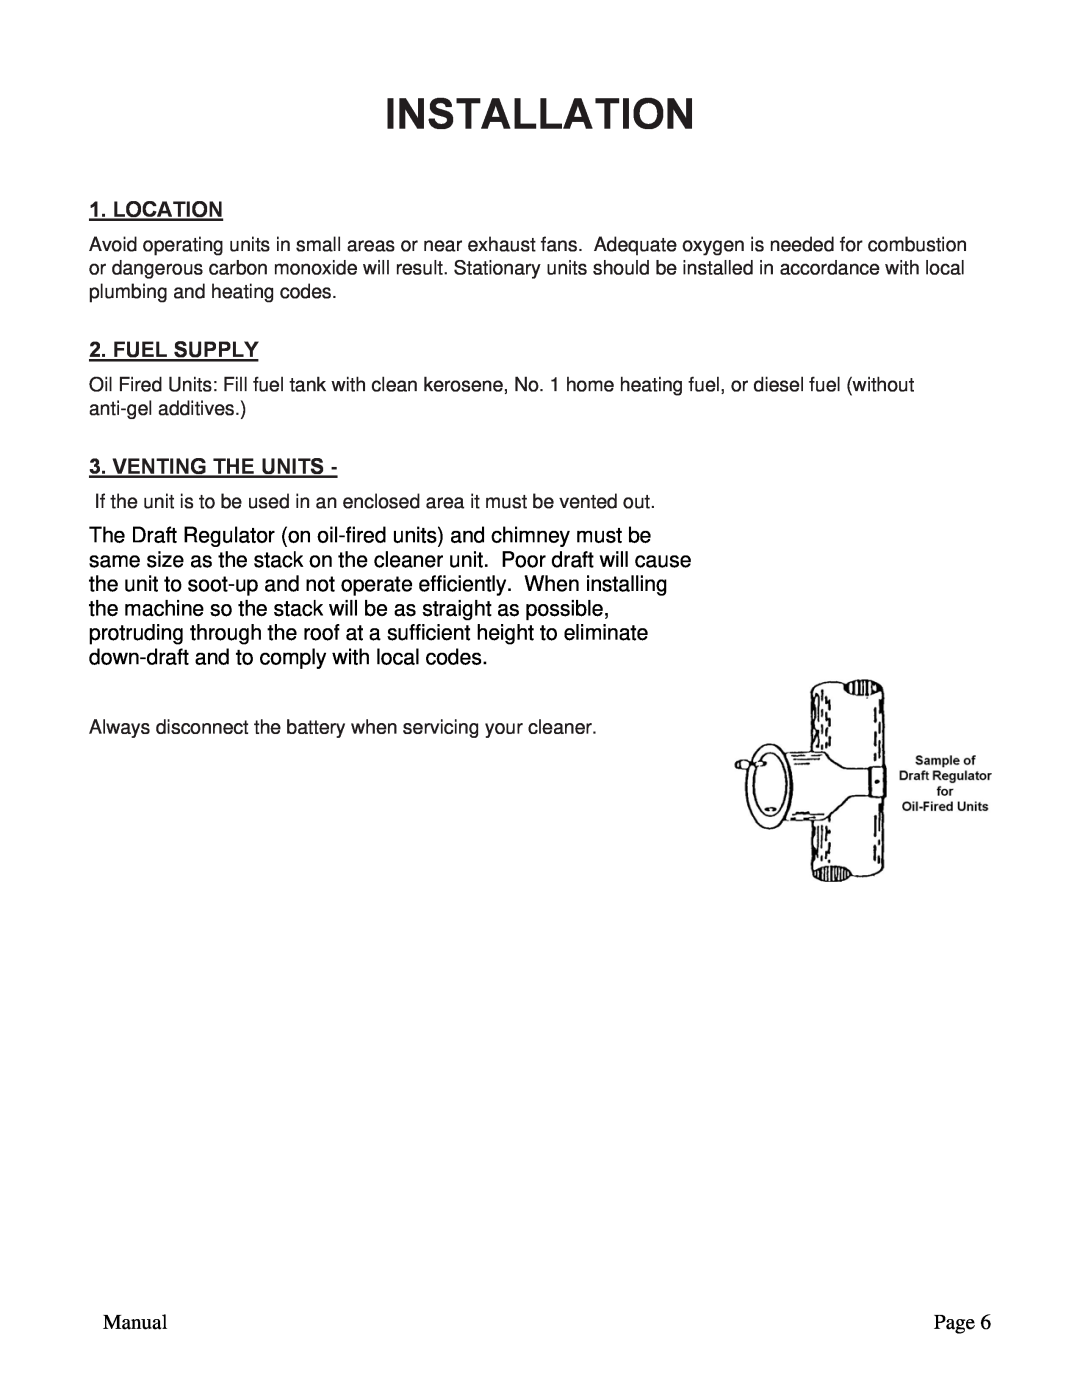 ACDelco PN 09301 A manual Installation, Location, Fuel Supply, Venting The Units 